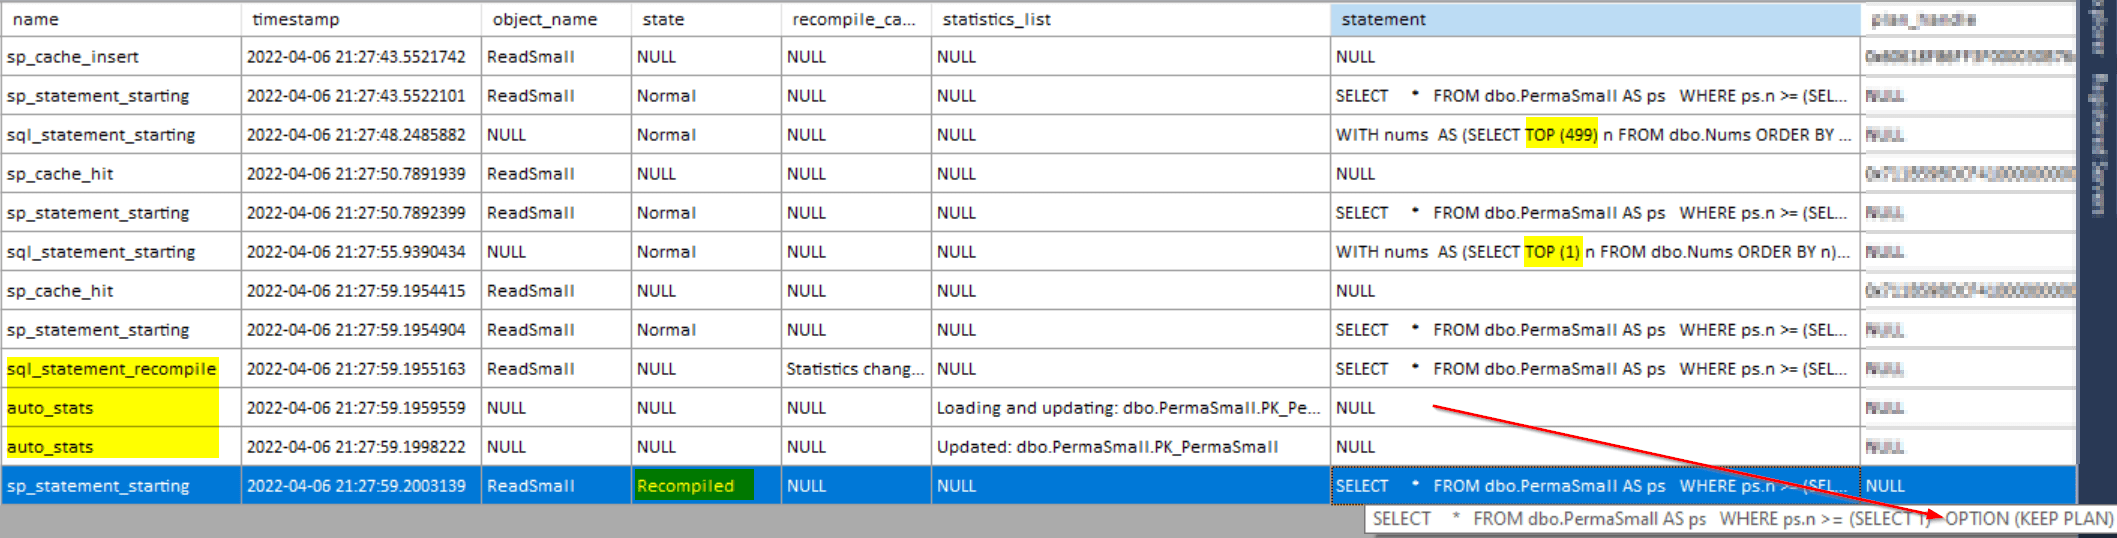 XE output showing the recompilation of PermaSmall with Keep Plan hint